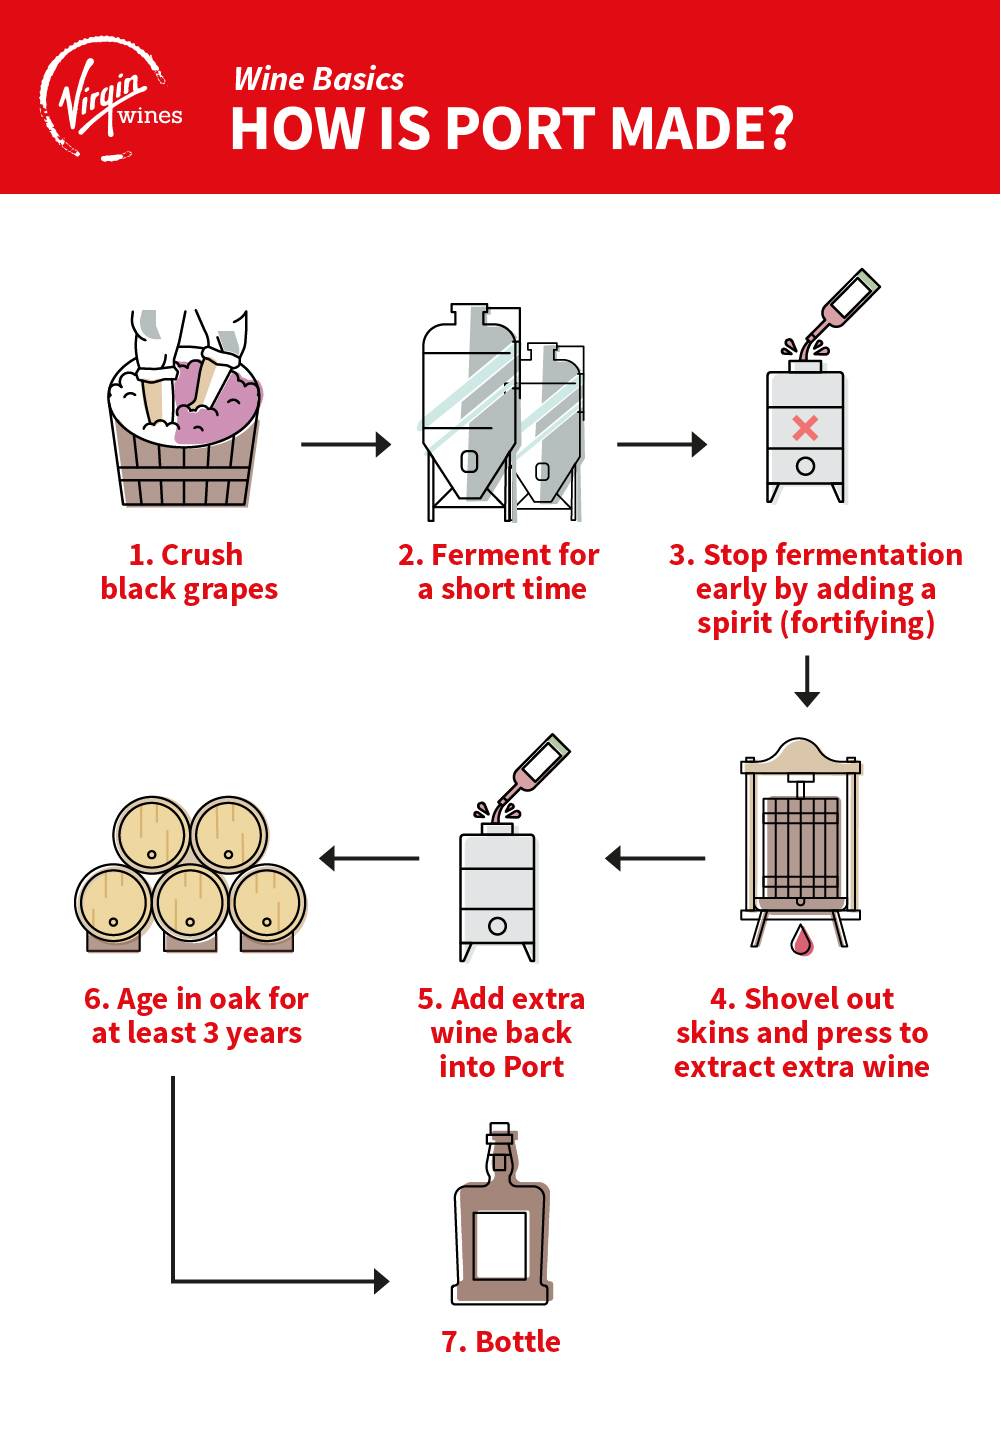 Infographic by Virgin Wines showing how Port is made